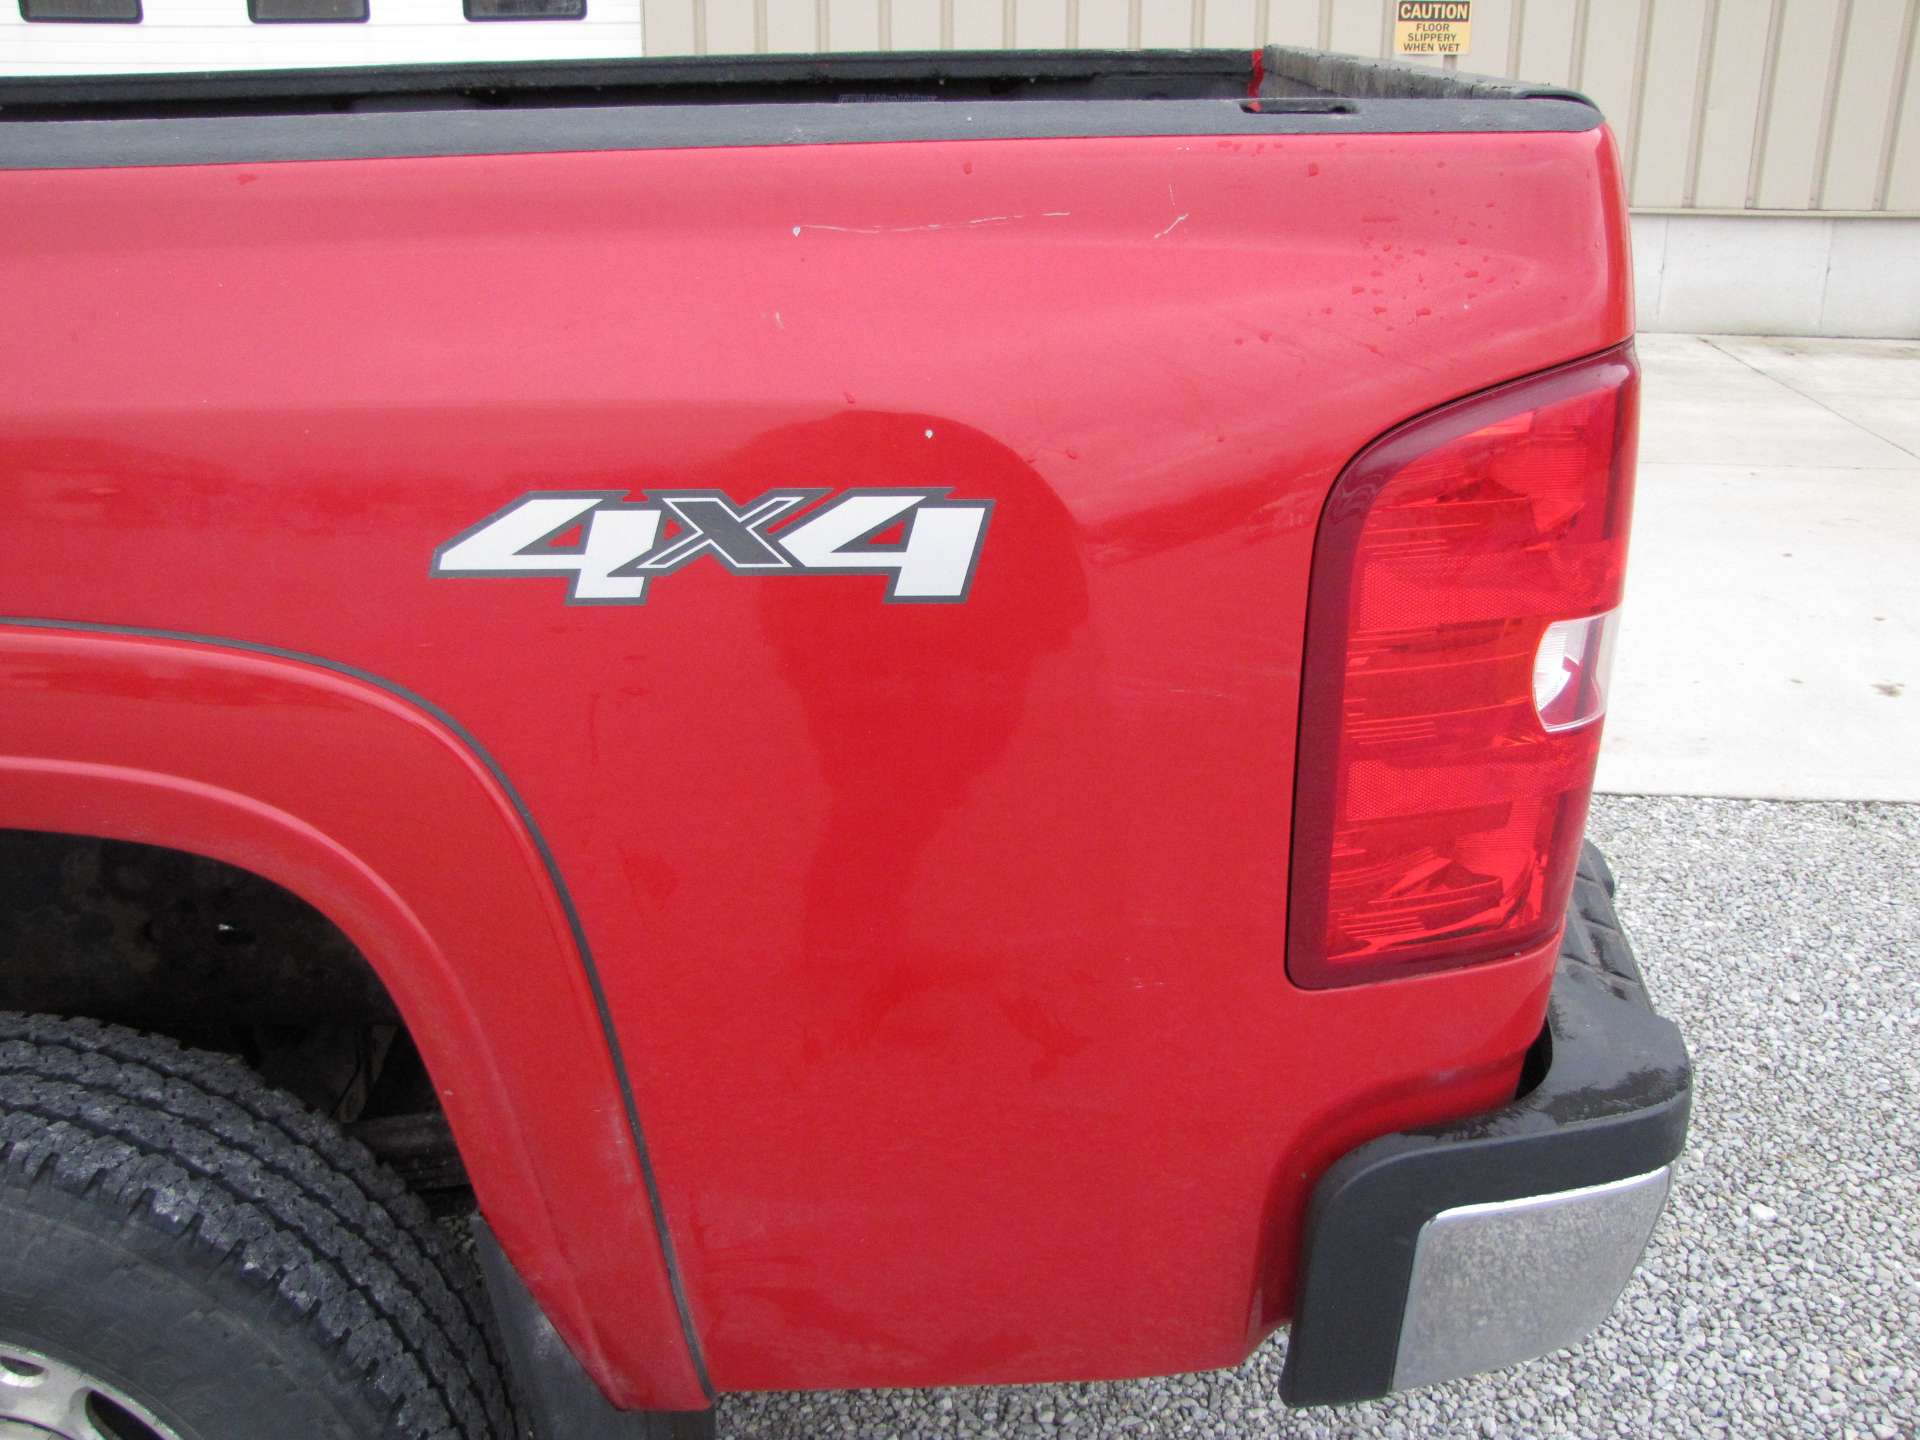 2009 Chevy 2500 HD LT pickup truck - Image 32 of 69